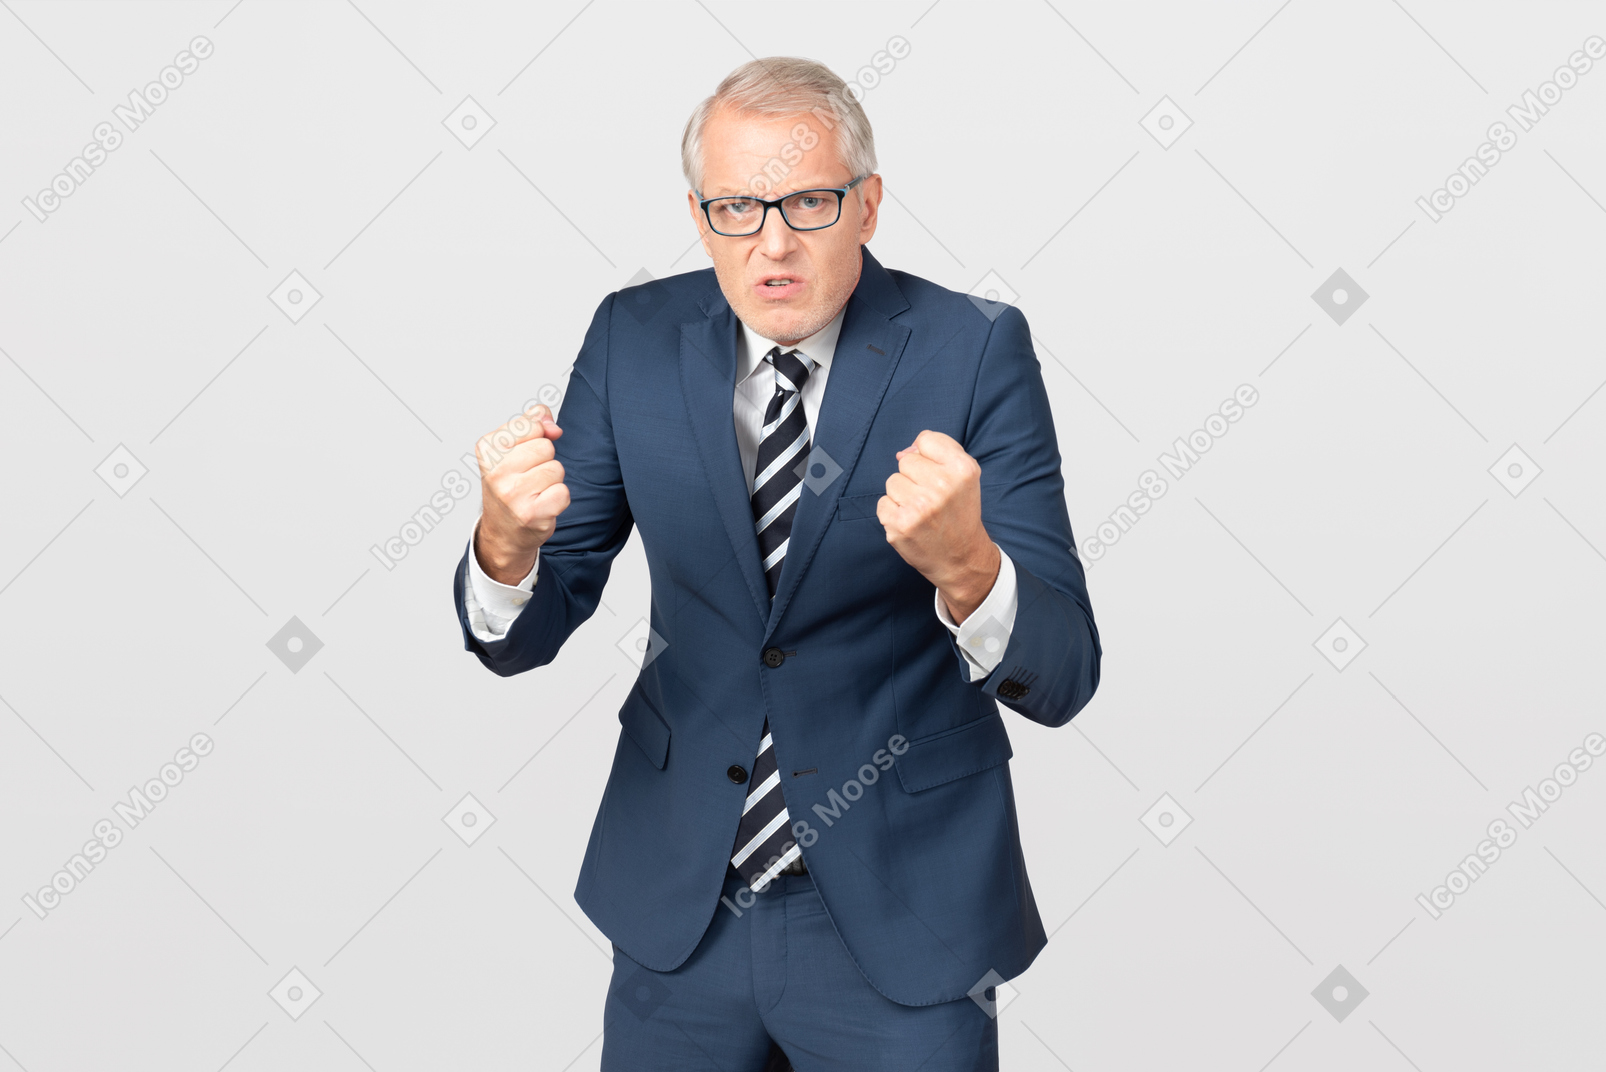 Angry middle aged businessman holding his fists up